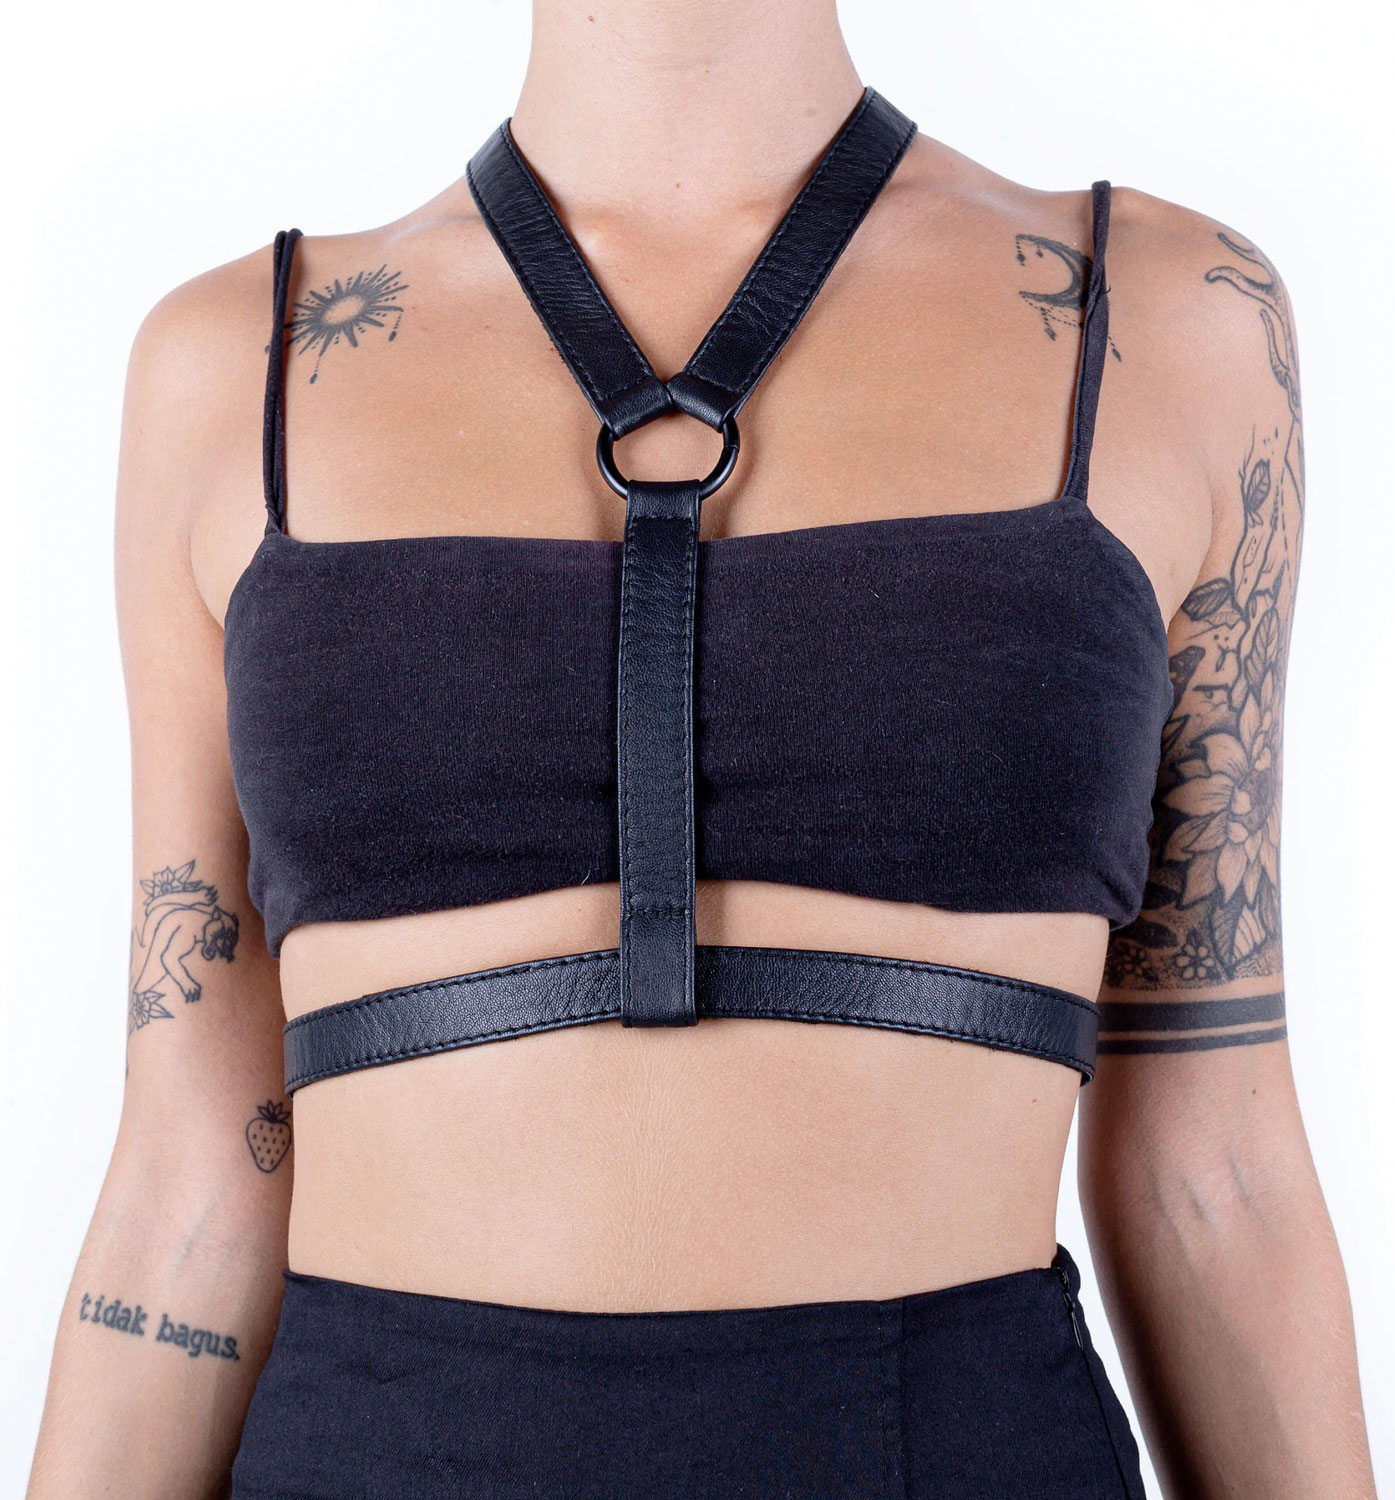 Simple Lingerie Cage Leather Utility and Fetish Harness Holster